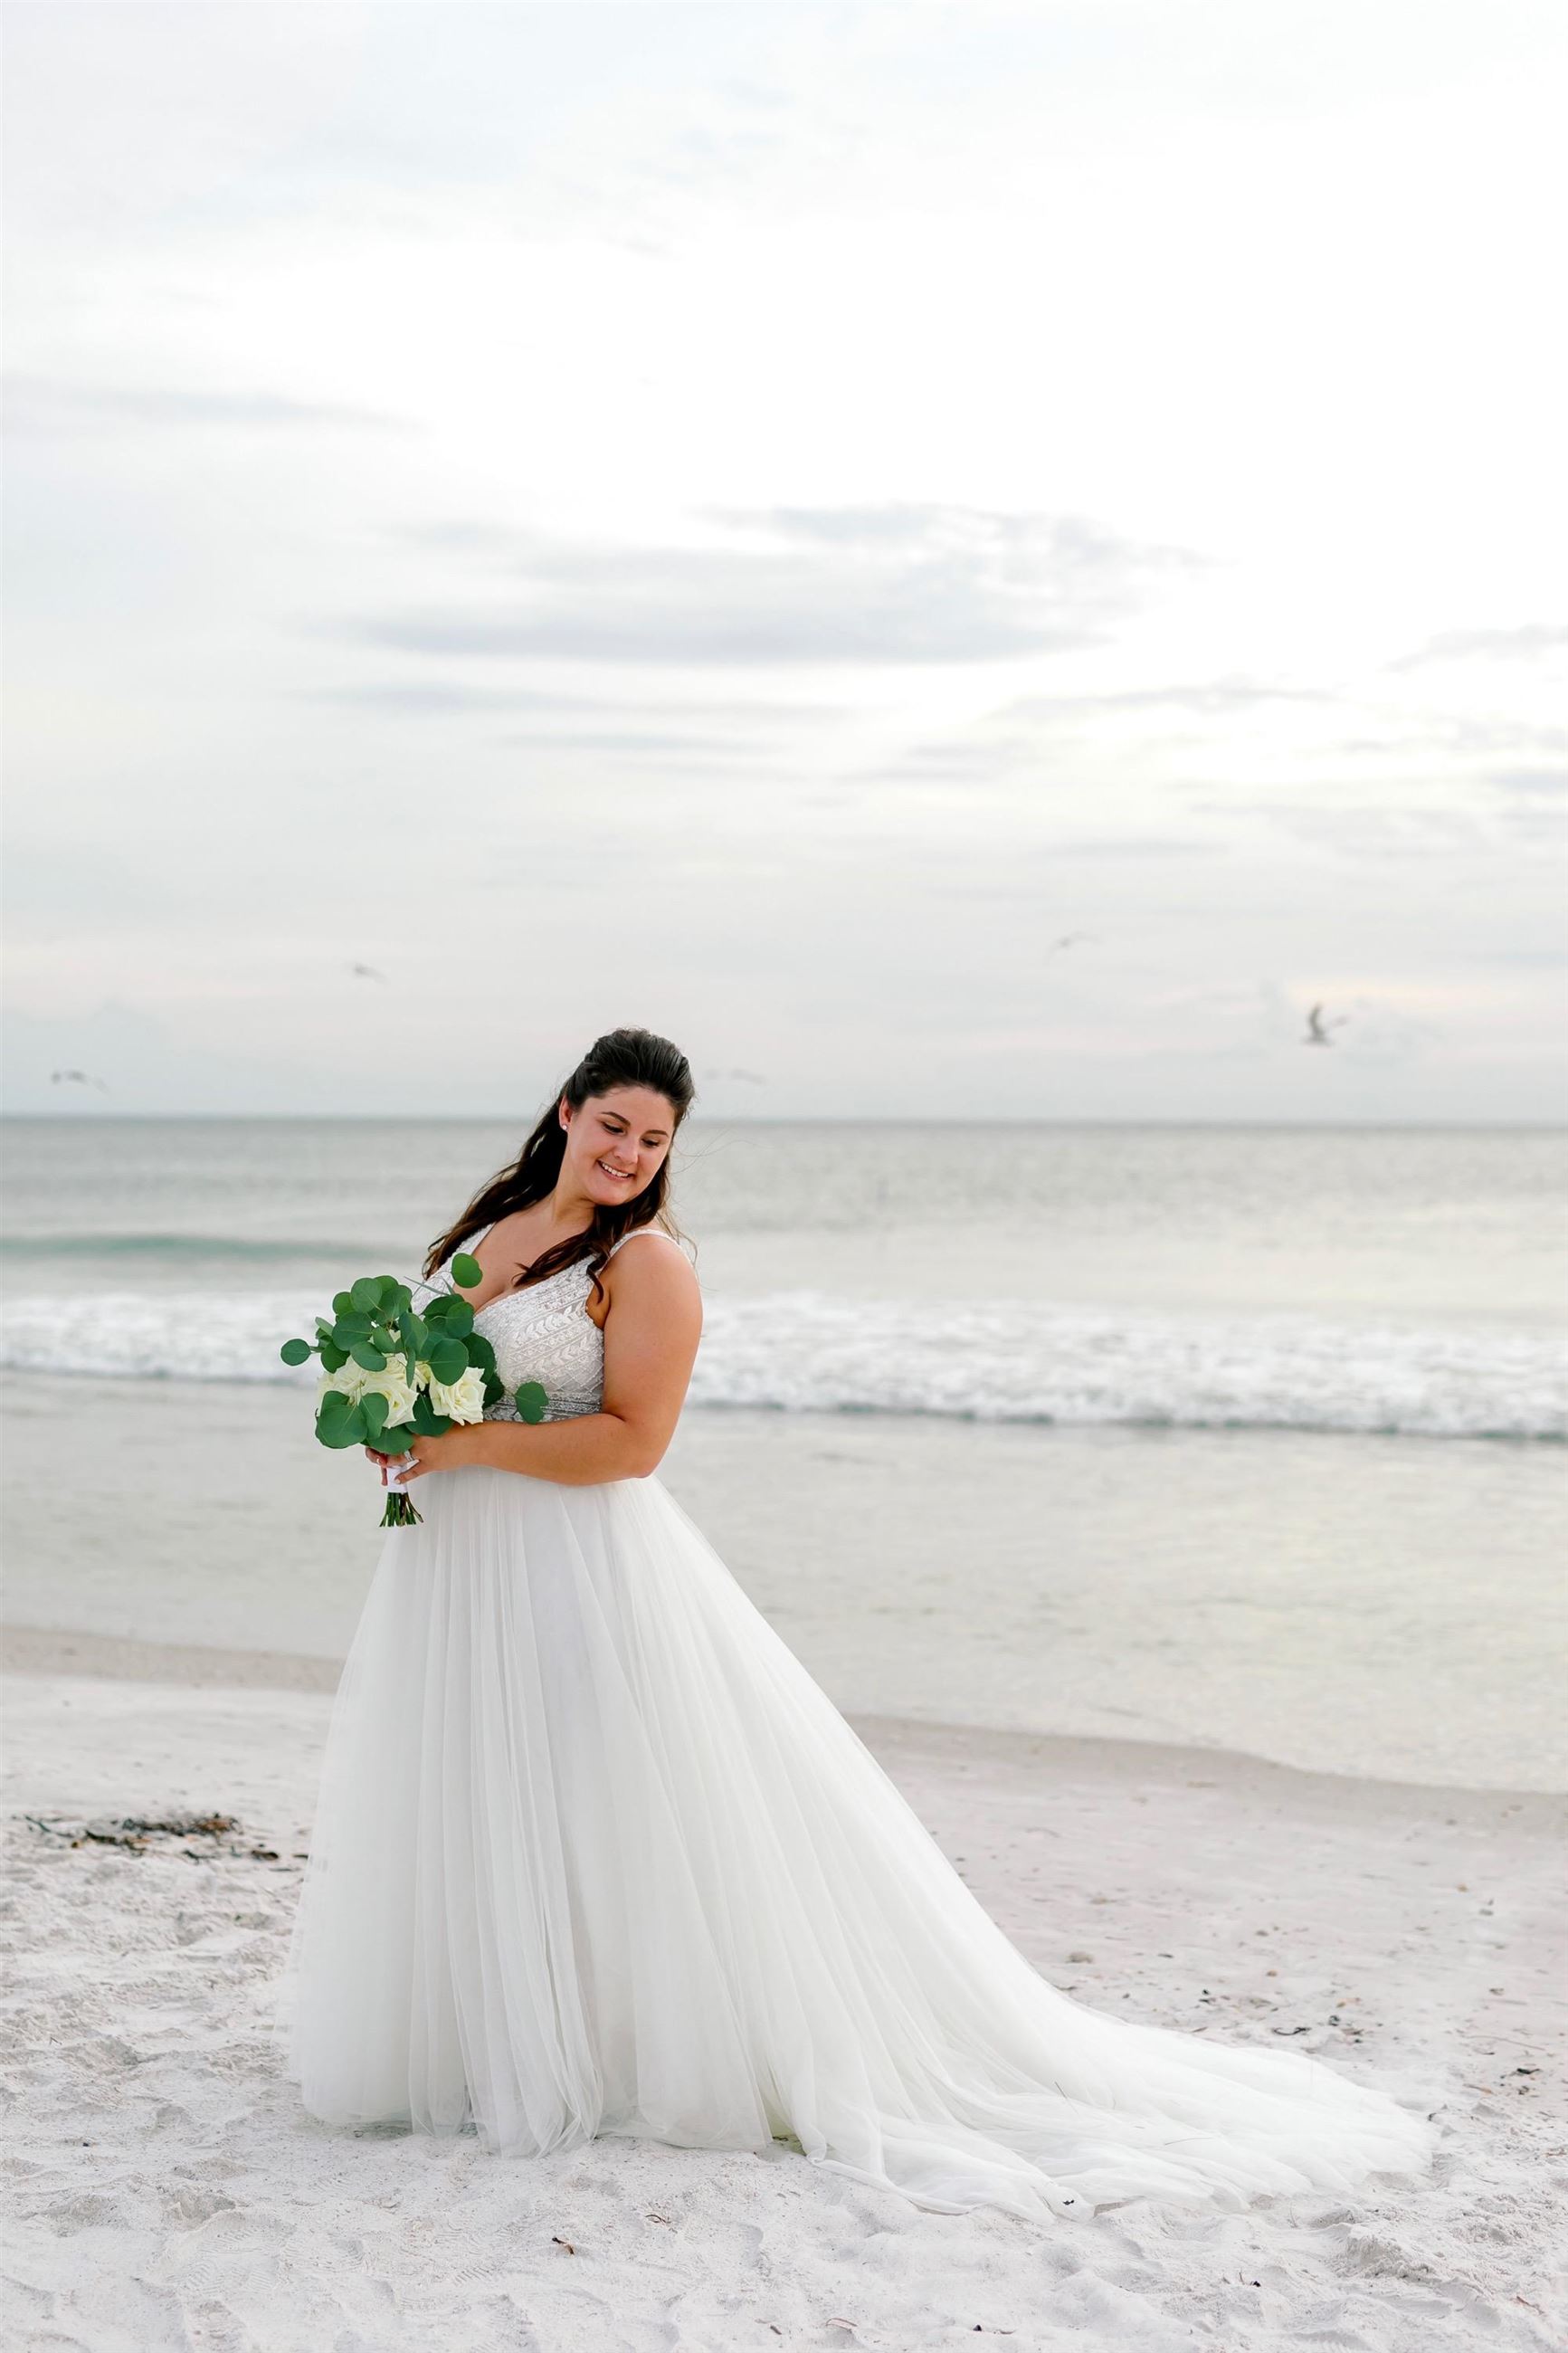 Bride by a body of water